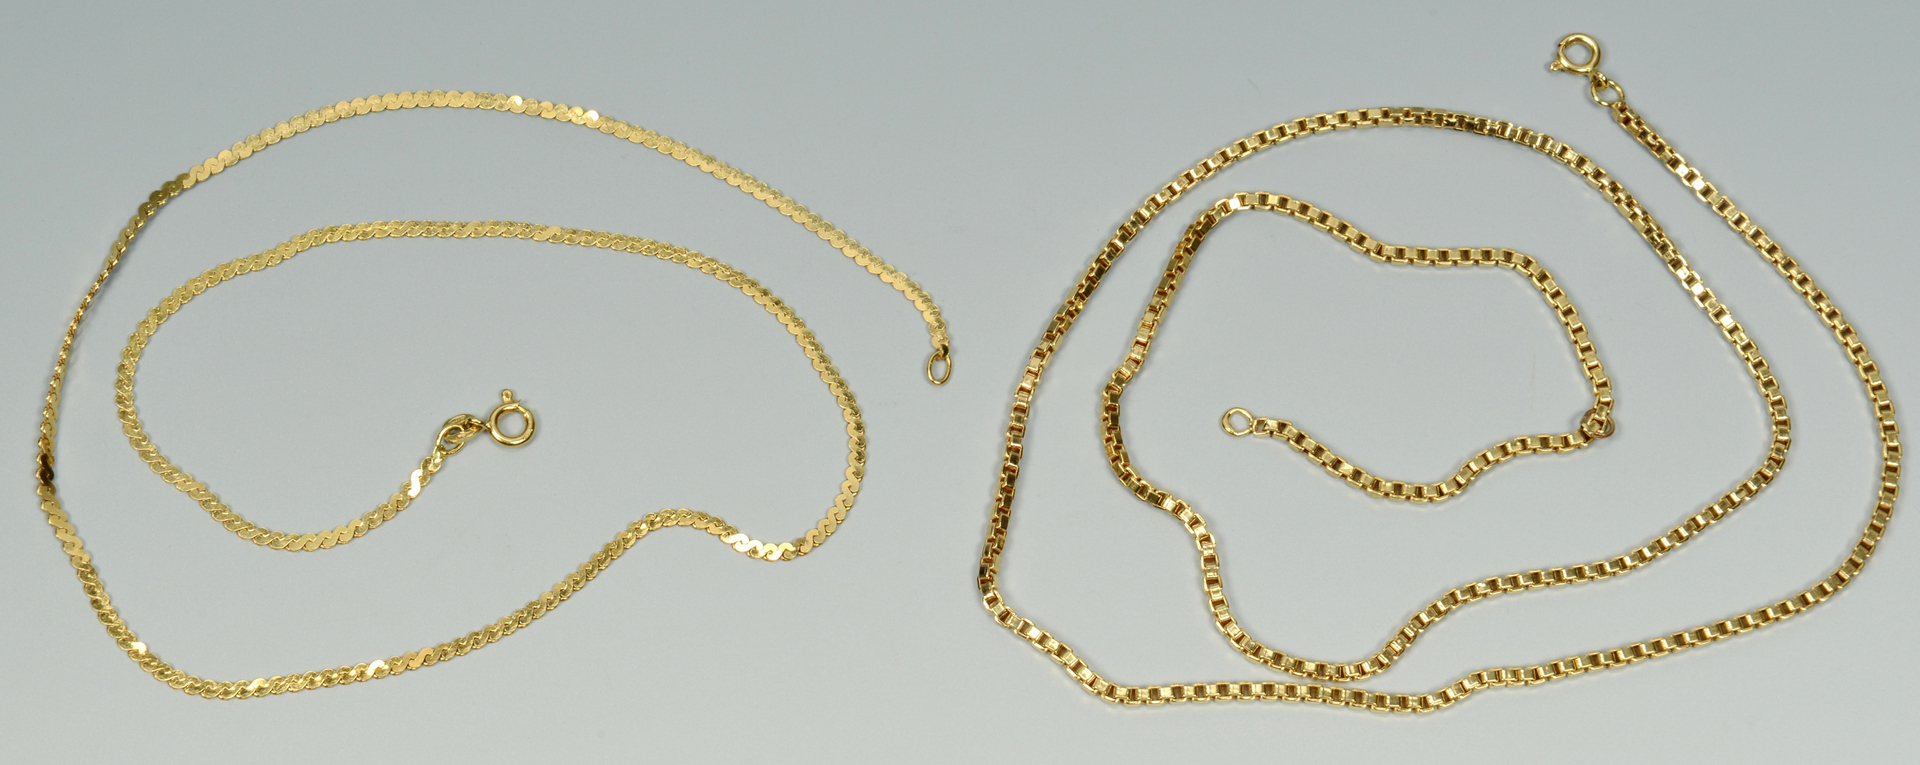 Lot 3088060: Two 18k Gold Chain Necklaces